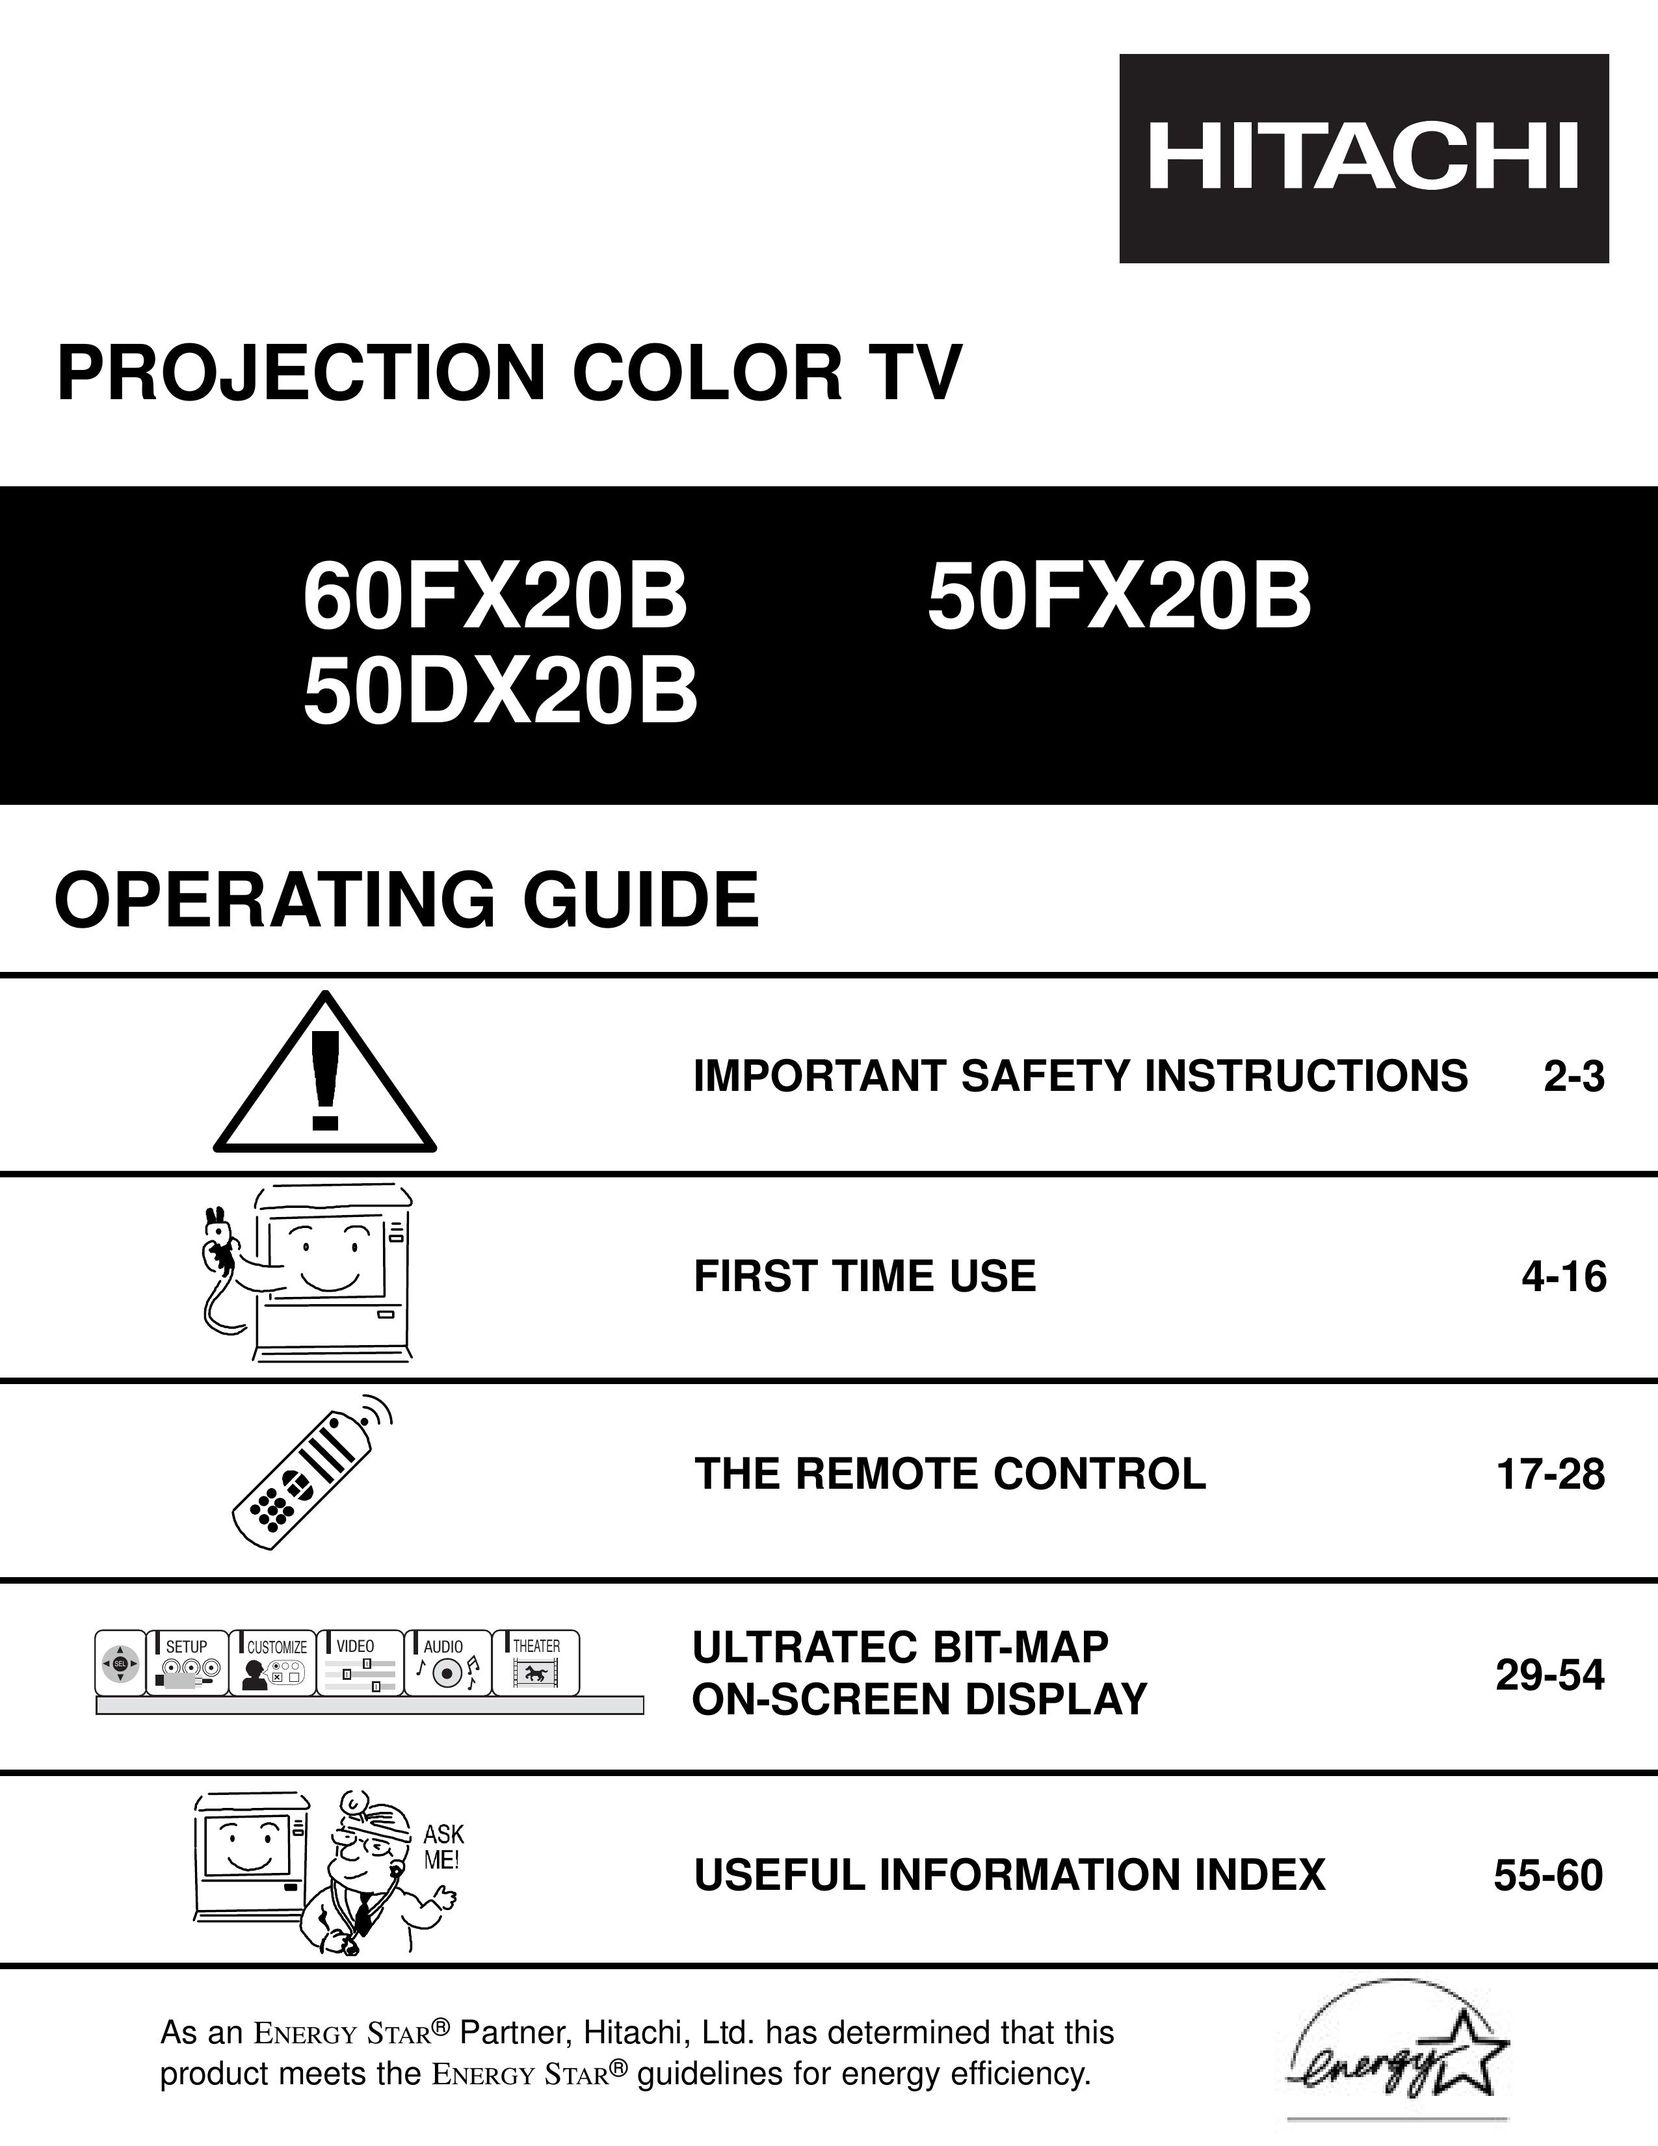 Ultratec 50DX20B Projection Television User Manual